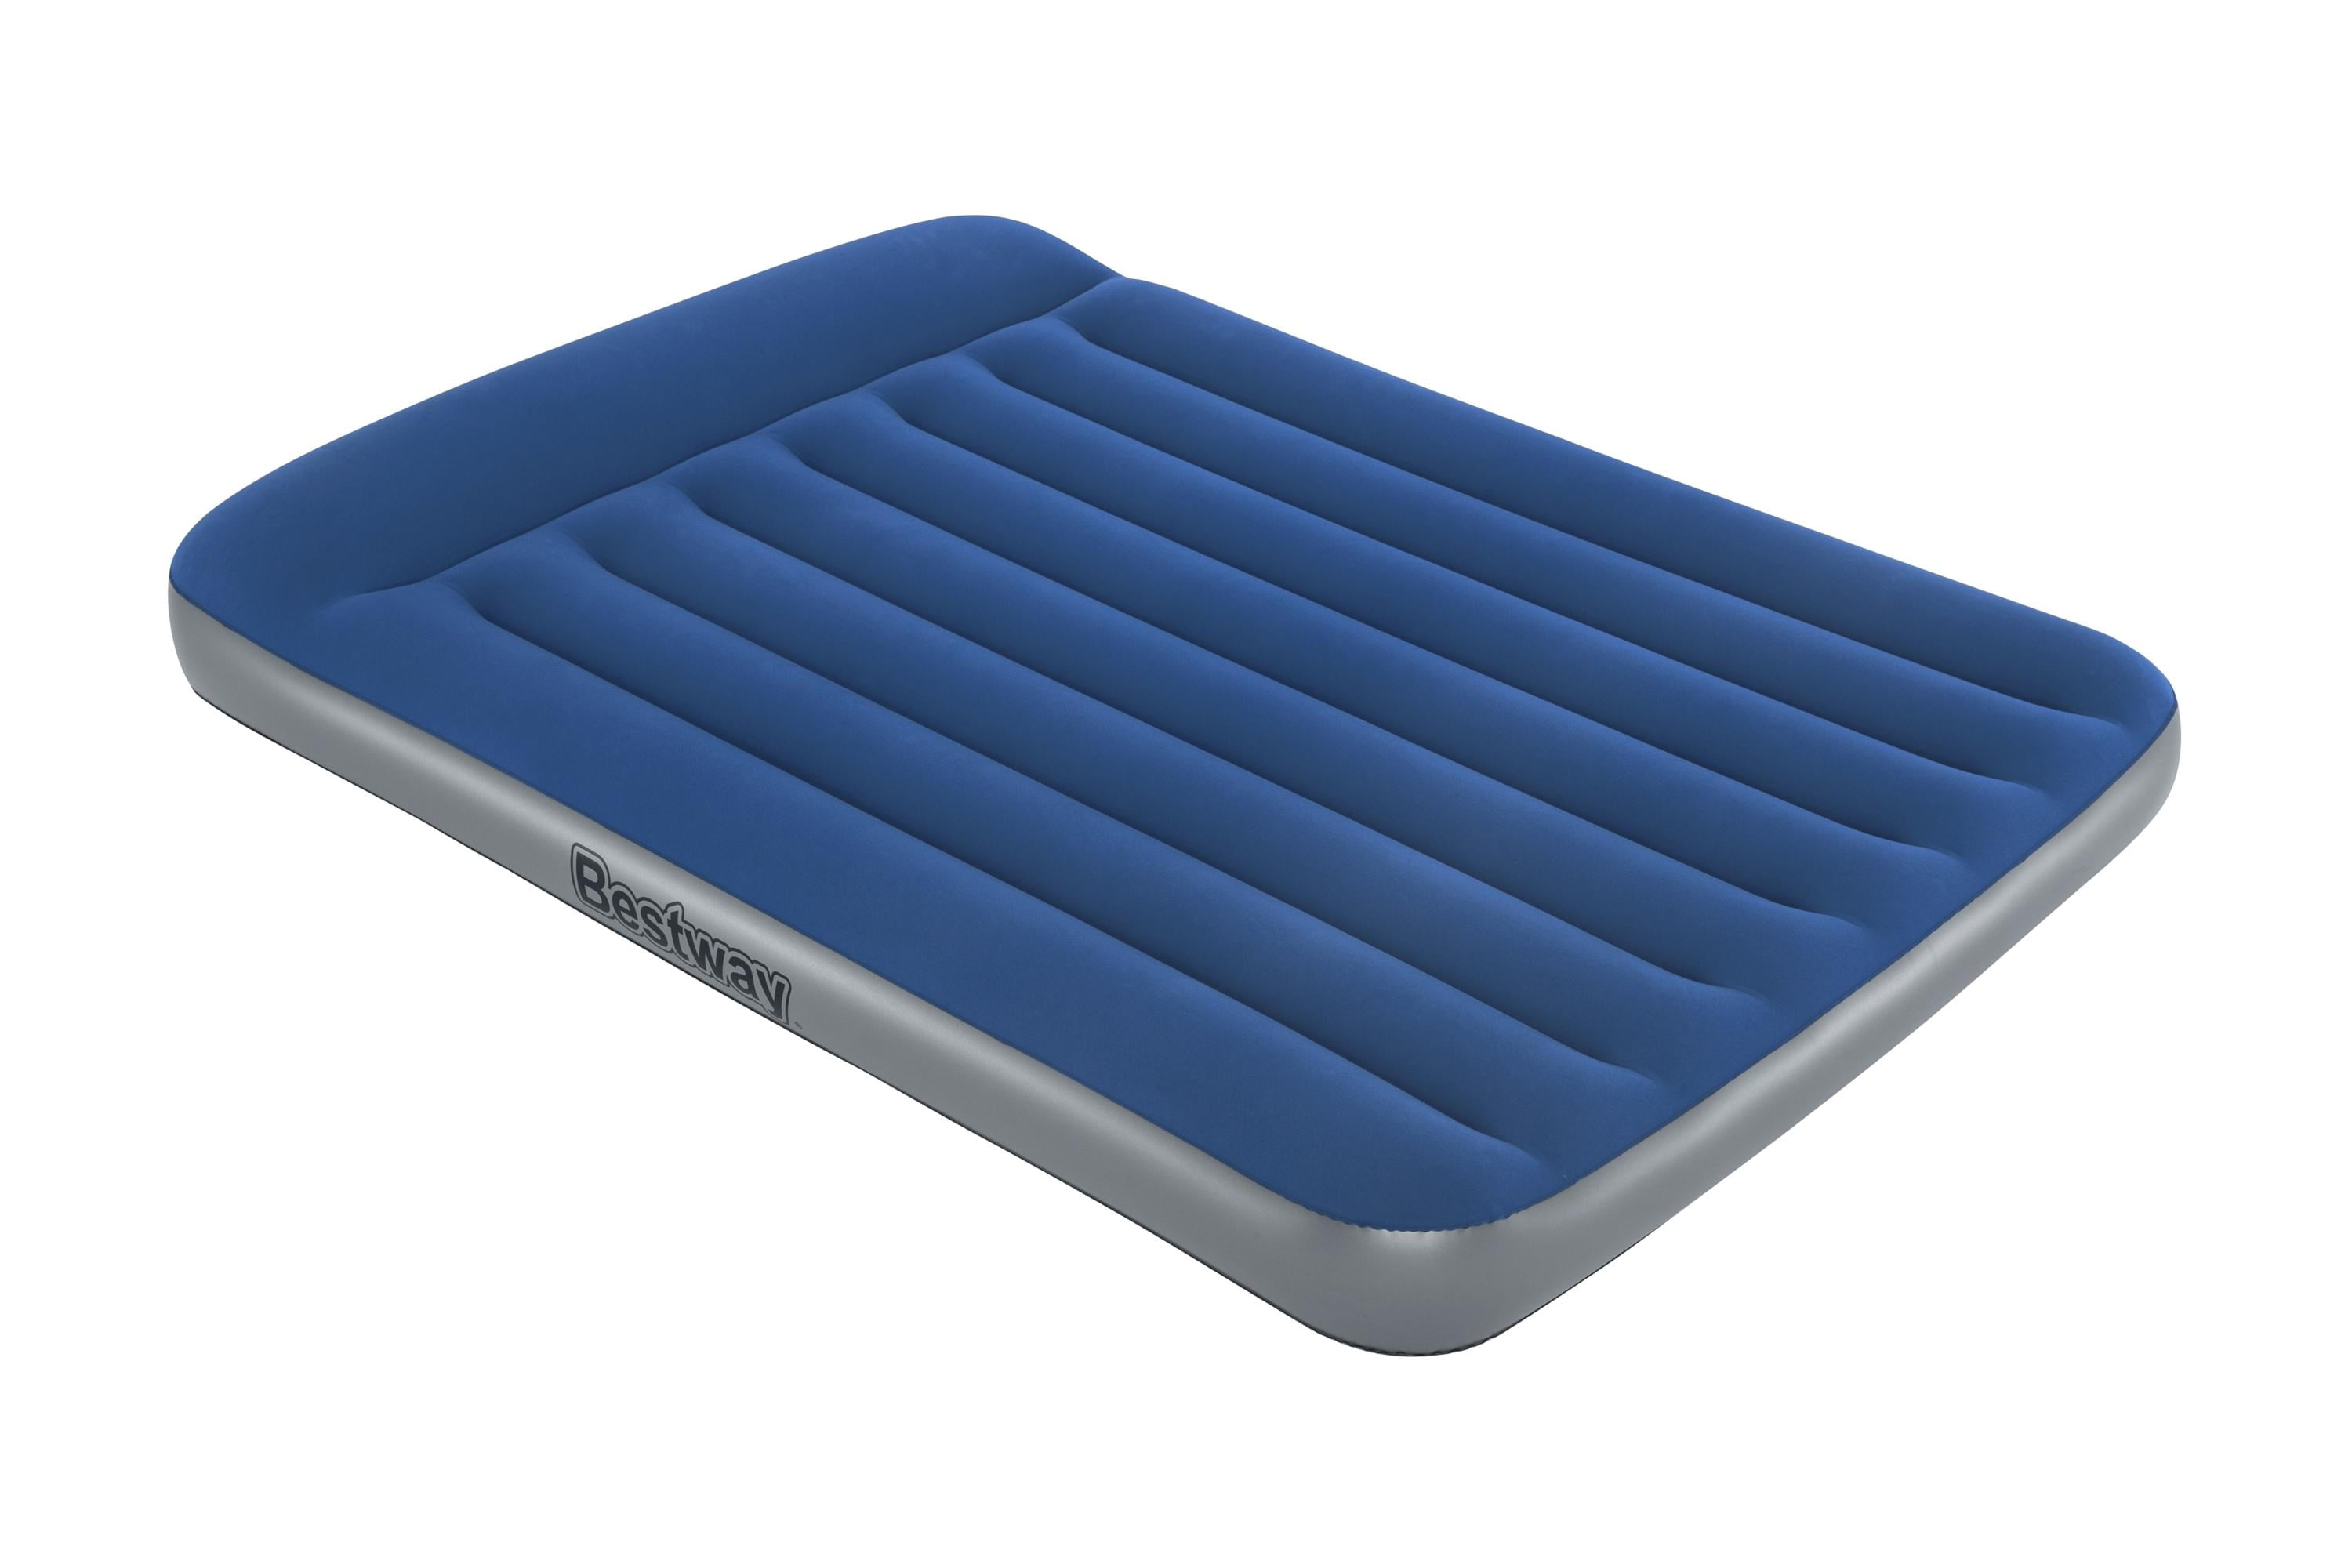 Bestway Tritech 12 Full Air Mattress With Built-in Pump Antimicrobial Coating - Walmartcom